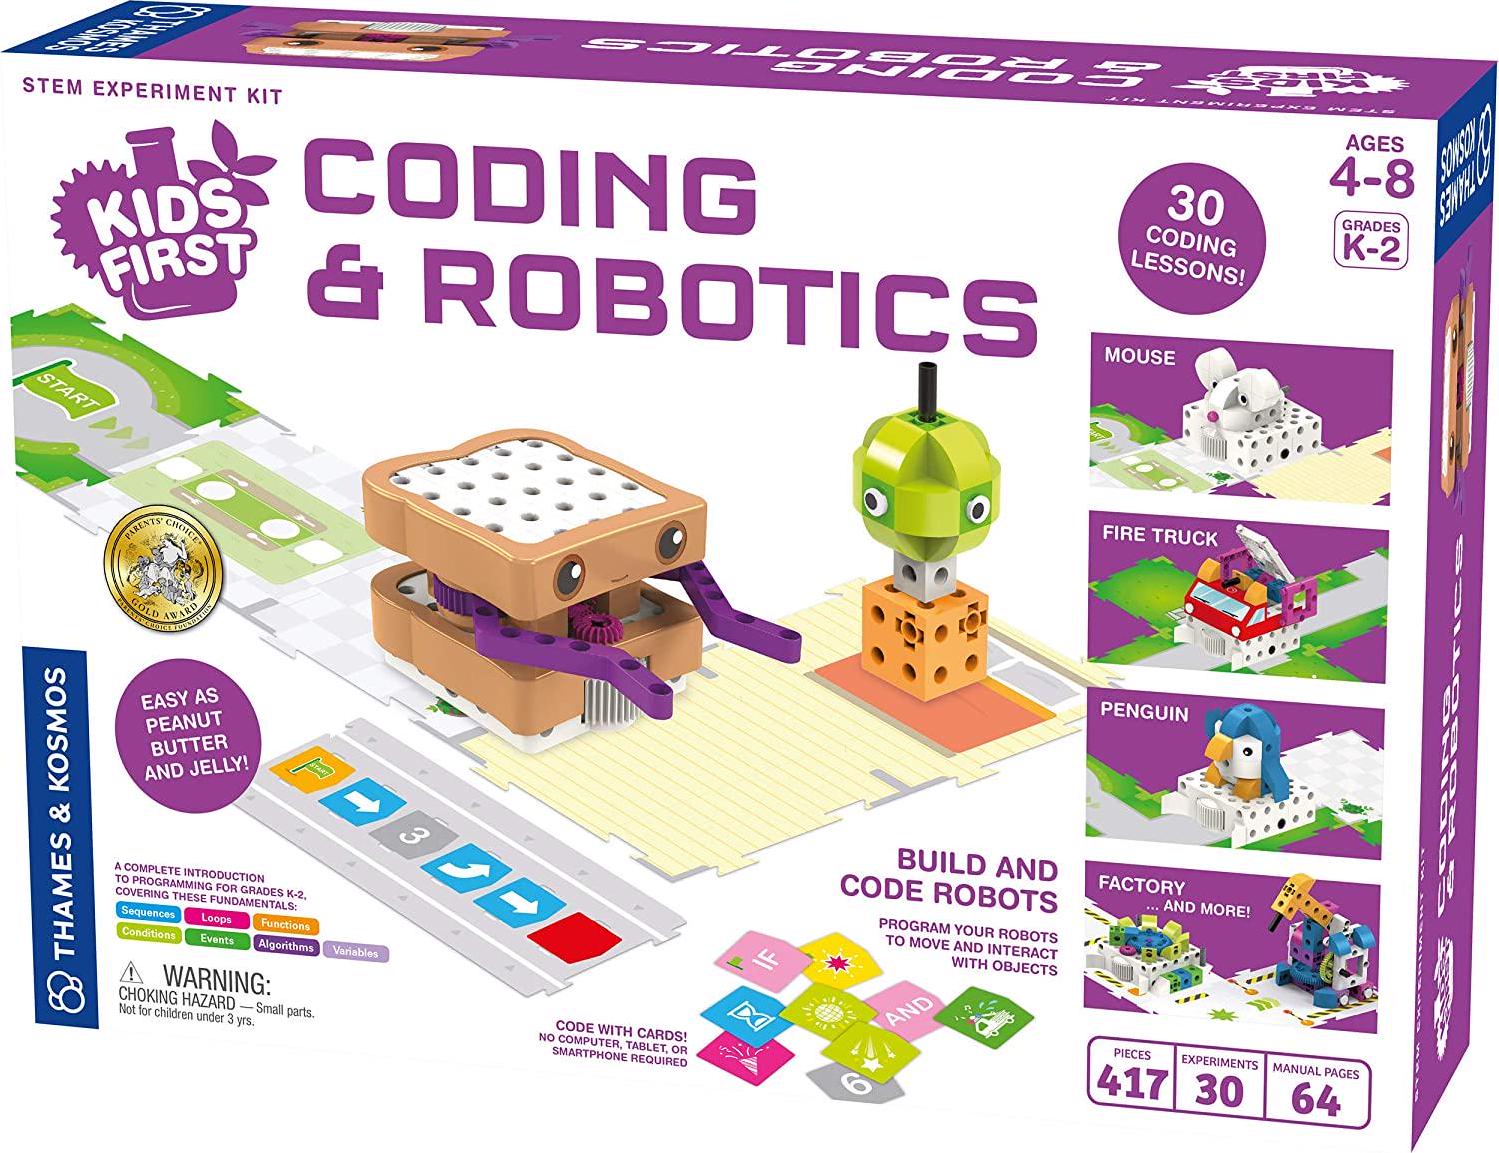 THAMES & KOSMOS, Kids First Coding and Robotics | No App Needed | Grades K-2 | Intro to Sequences, Loops, Functions, Conditions, Events, Algorithms, Variables | Parents Choice Gold Award Winner | by Thames and Kosmos